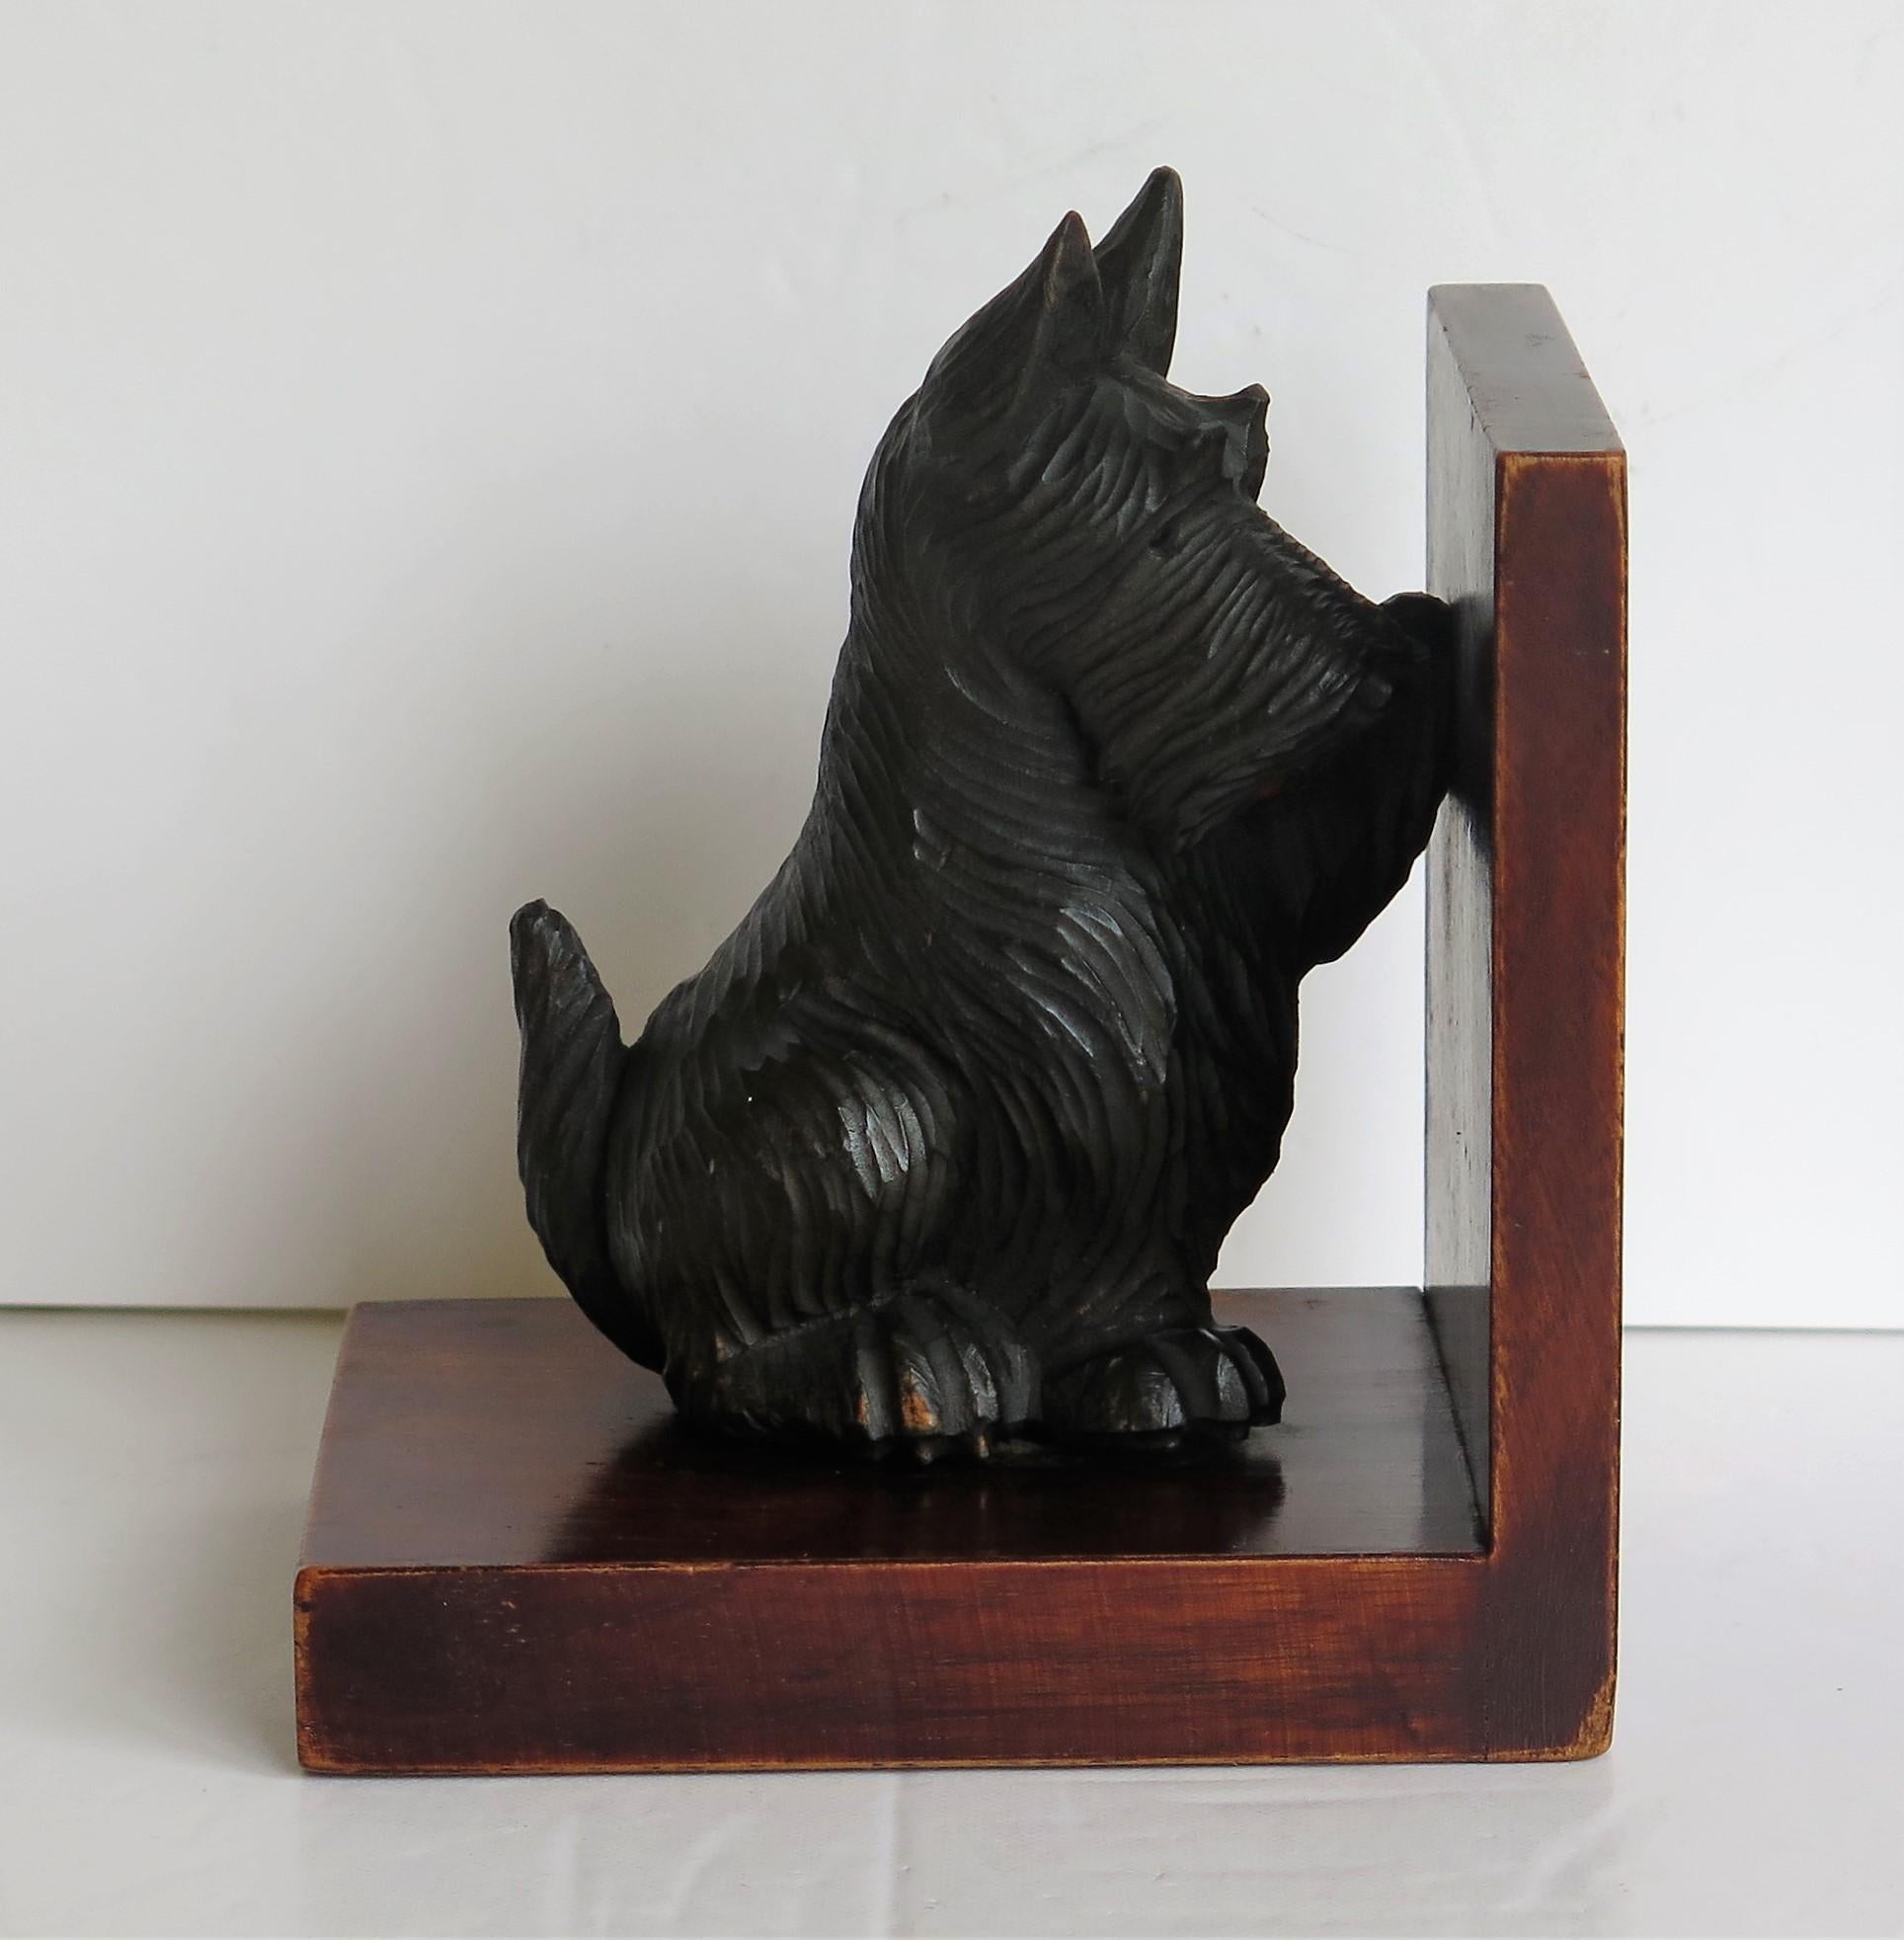 These are a beautiful pair of Art Deco period, Book ends of two different Terrier dogs on hardwood frames.

Each dog has been very well modelled with good detail. The dogs are made of wood or a moulded composite material, then hand painted. The